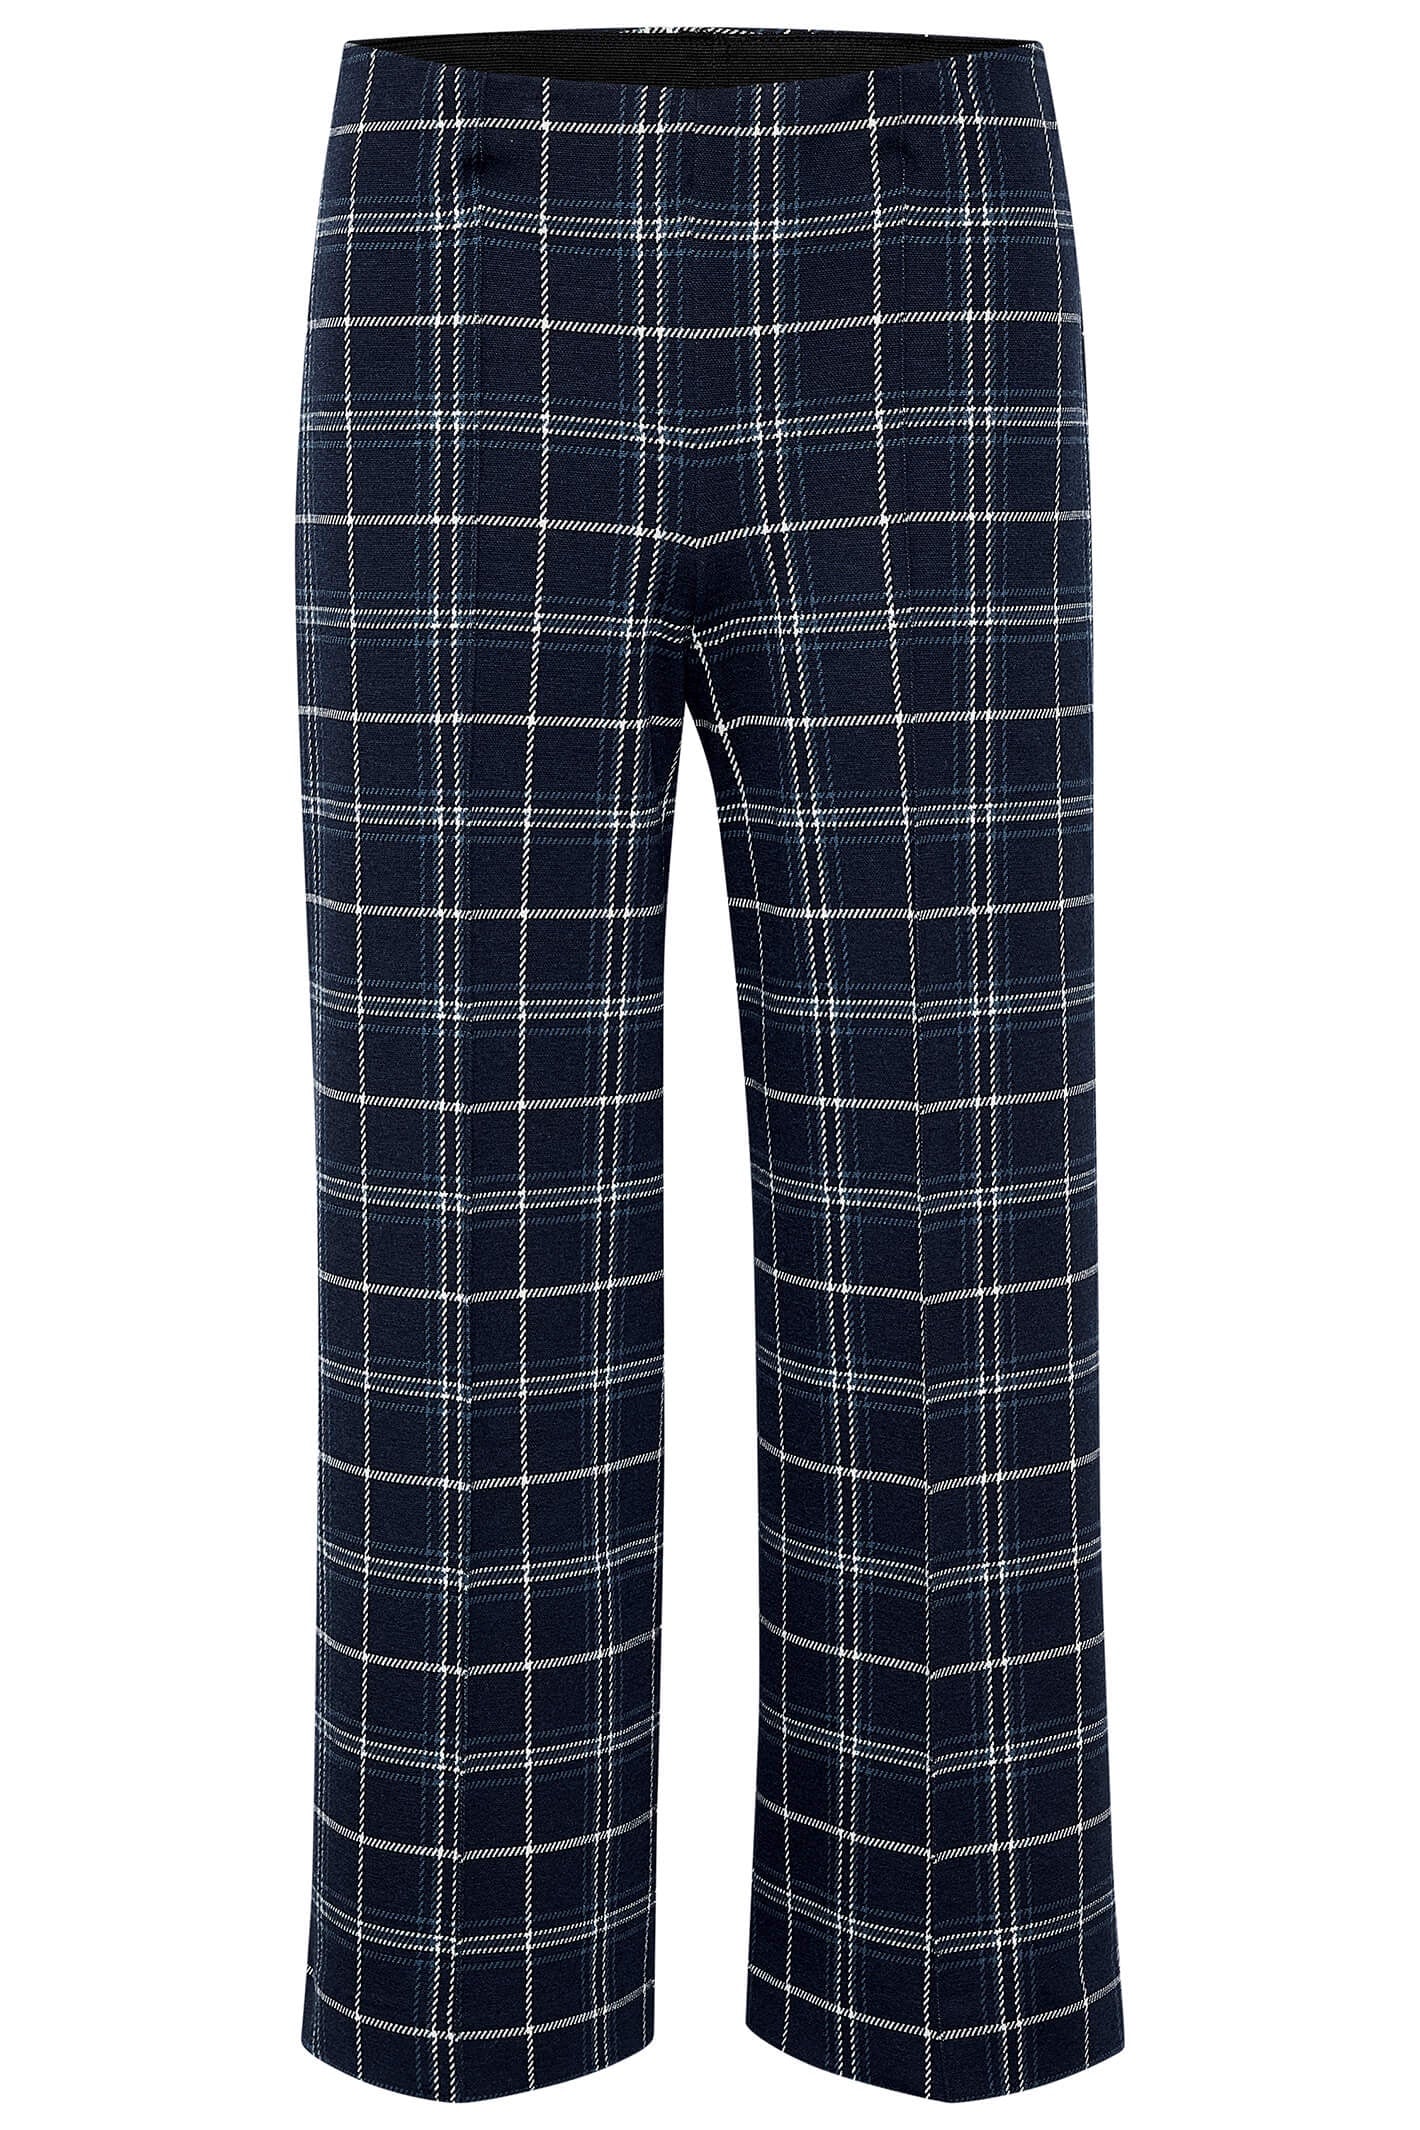 Dislocated vintage / orange red plaid cropped trousers no.077 vintage -  Shop takeold00 Women's Pants - Pinkoi